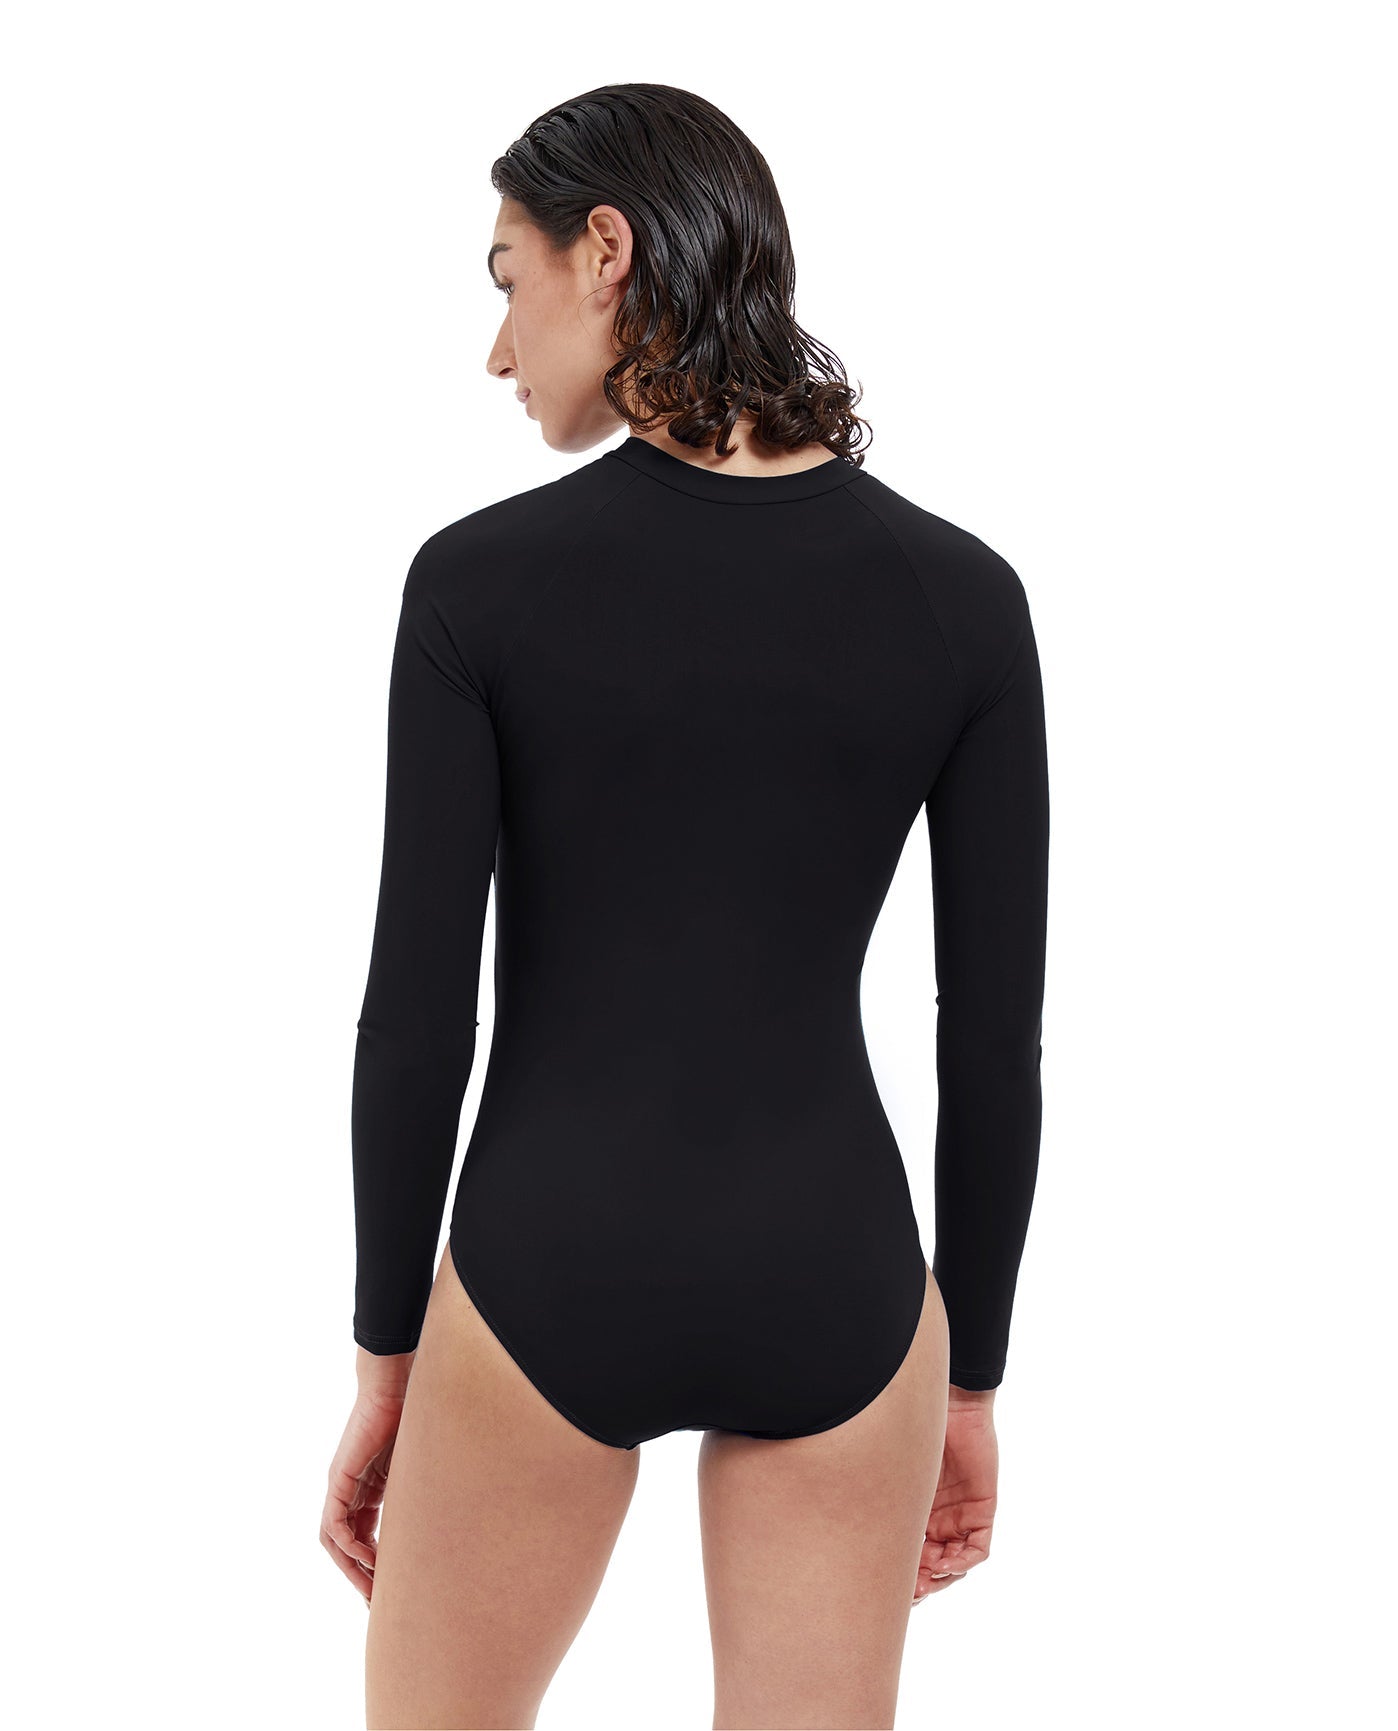 Back View Of Free Sport Ultimate Wave Long Sleeve High Neck Rash Guard One Piece Swimsuit | FREE SPORT ULTIMATE WAVE BLACK